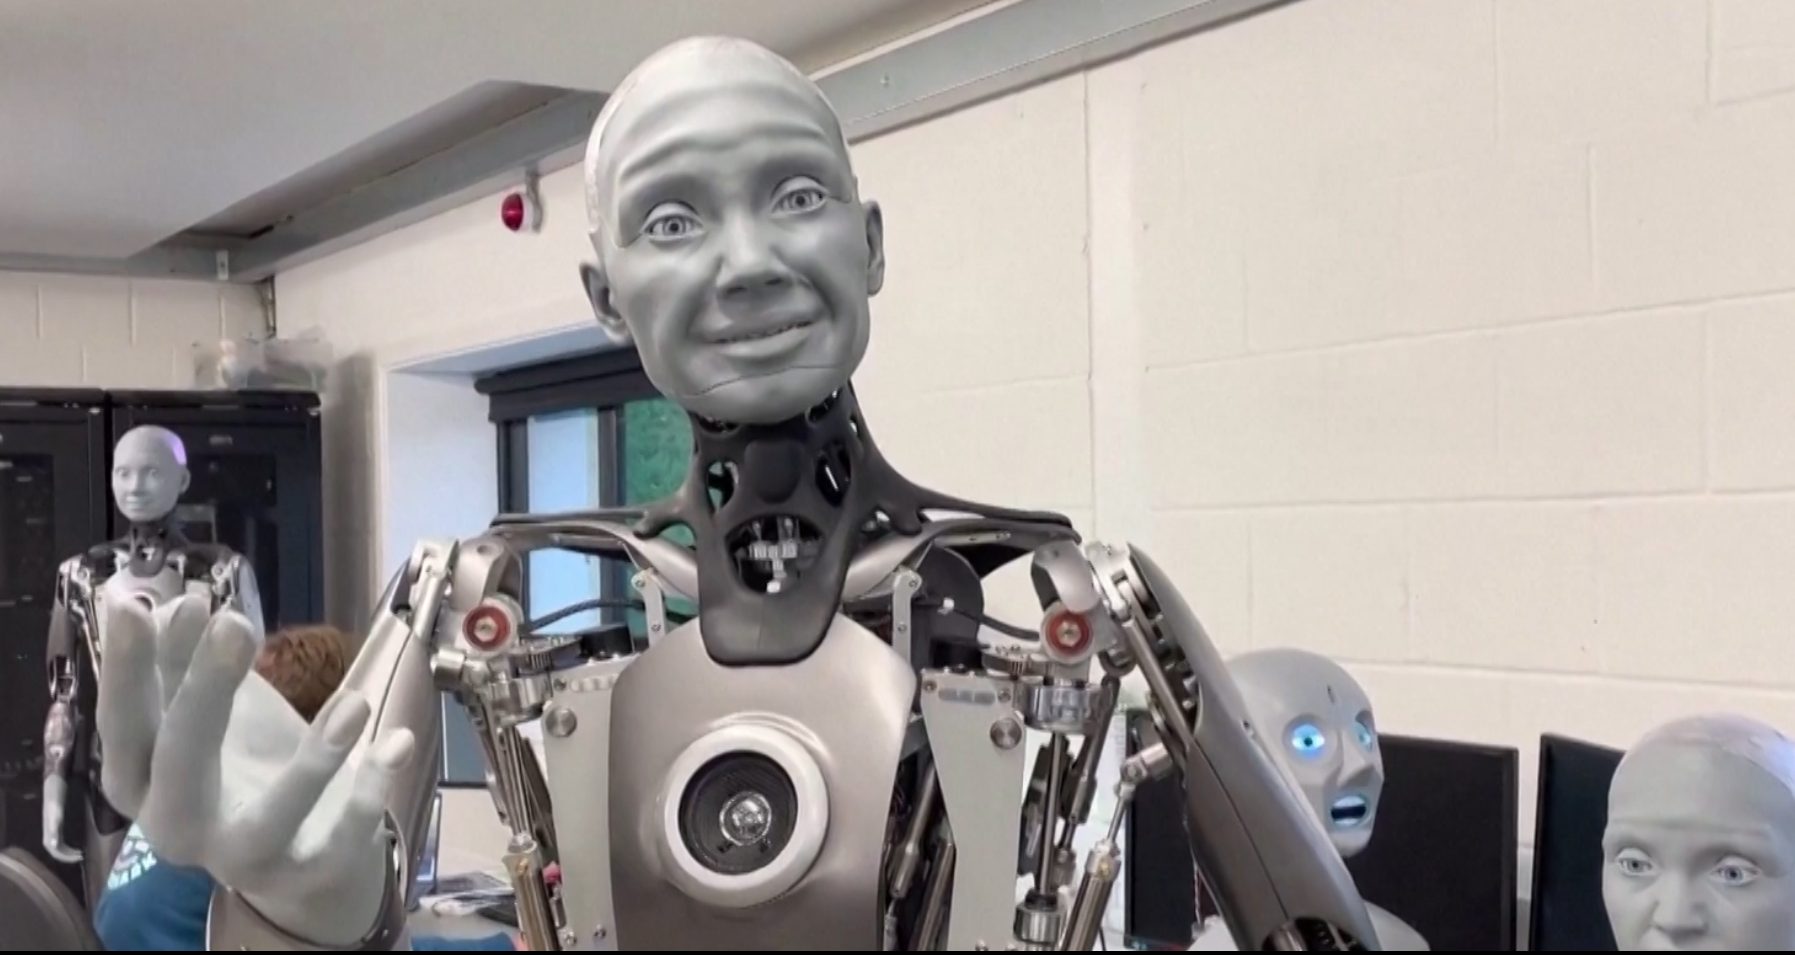 Meet Ameca, the remarkable (and not at all creepy) human-like robot - National | Globalnews.ca